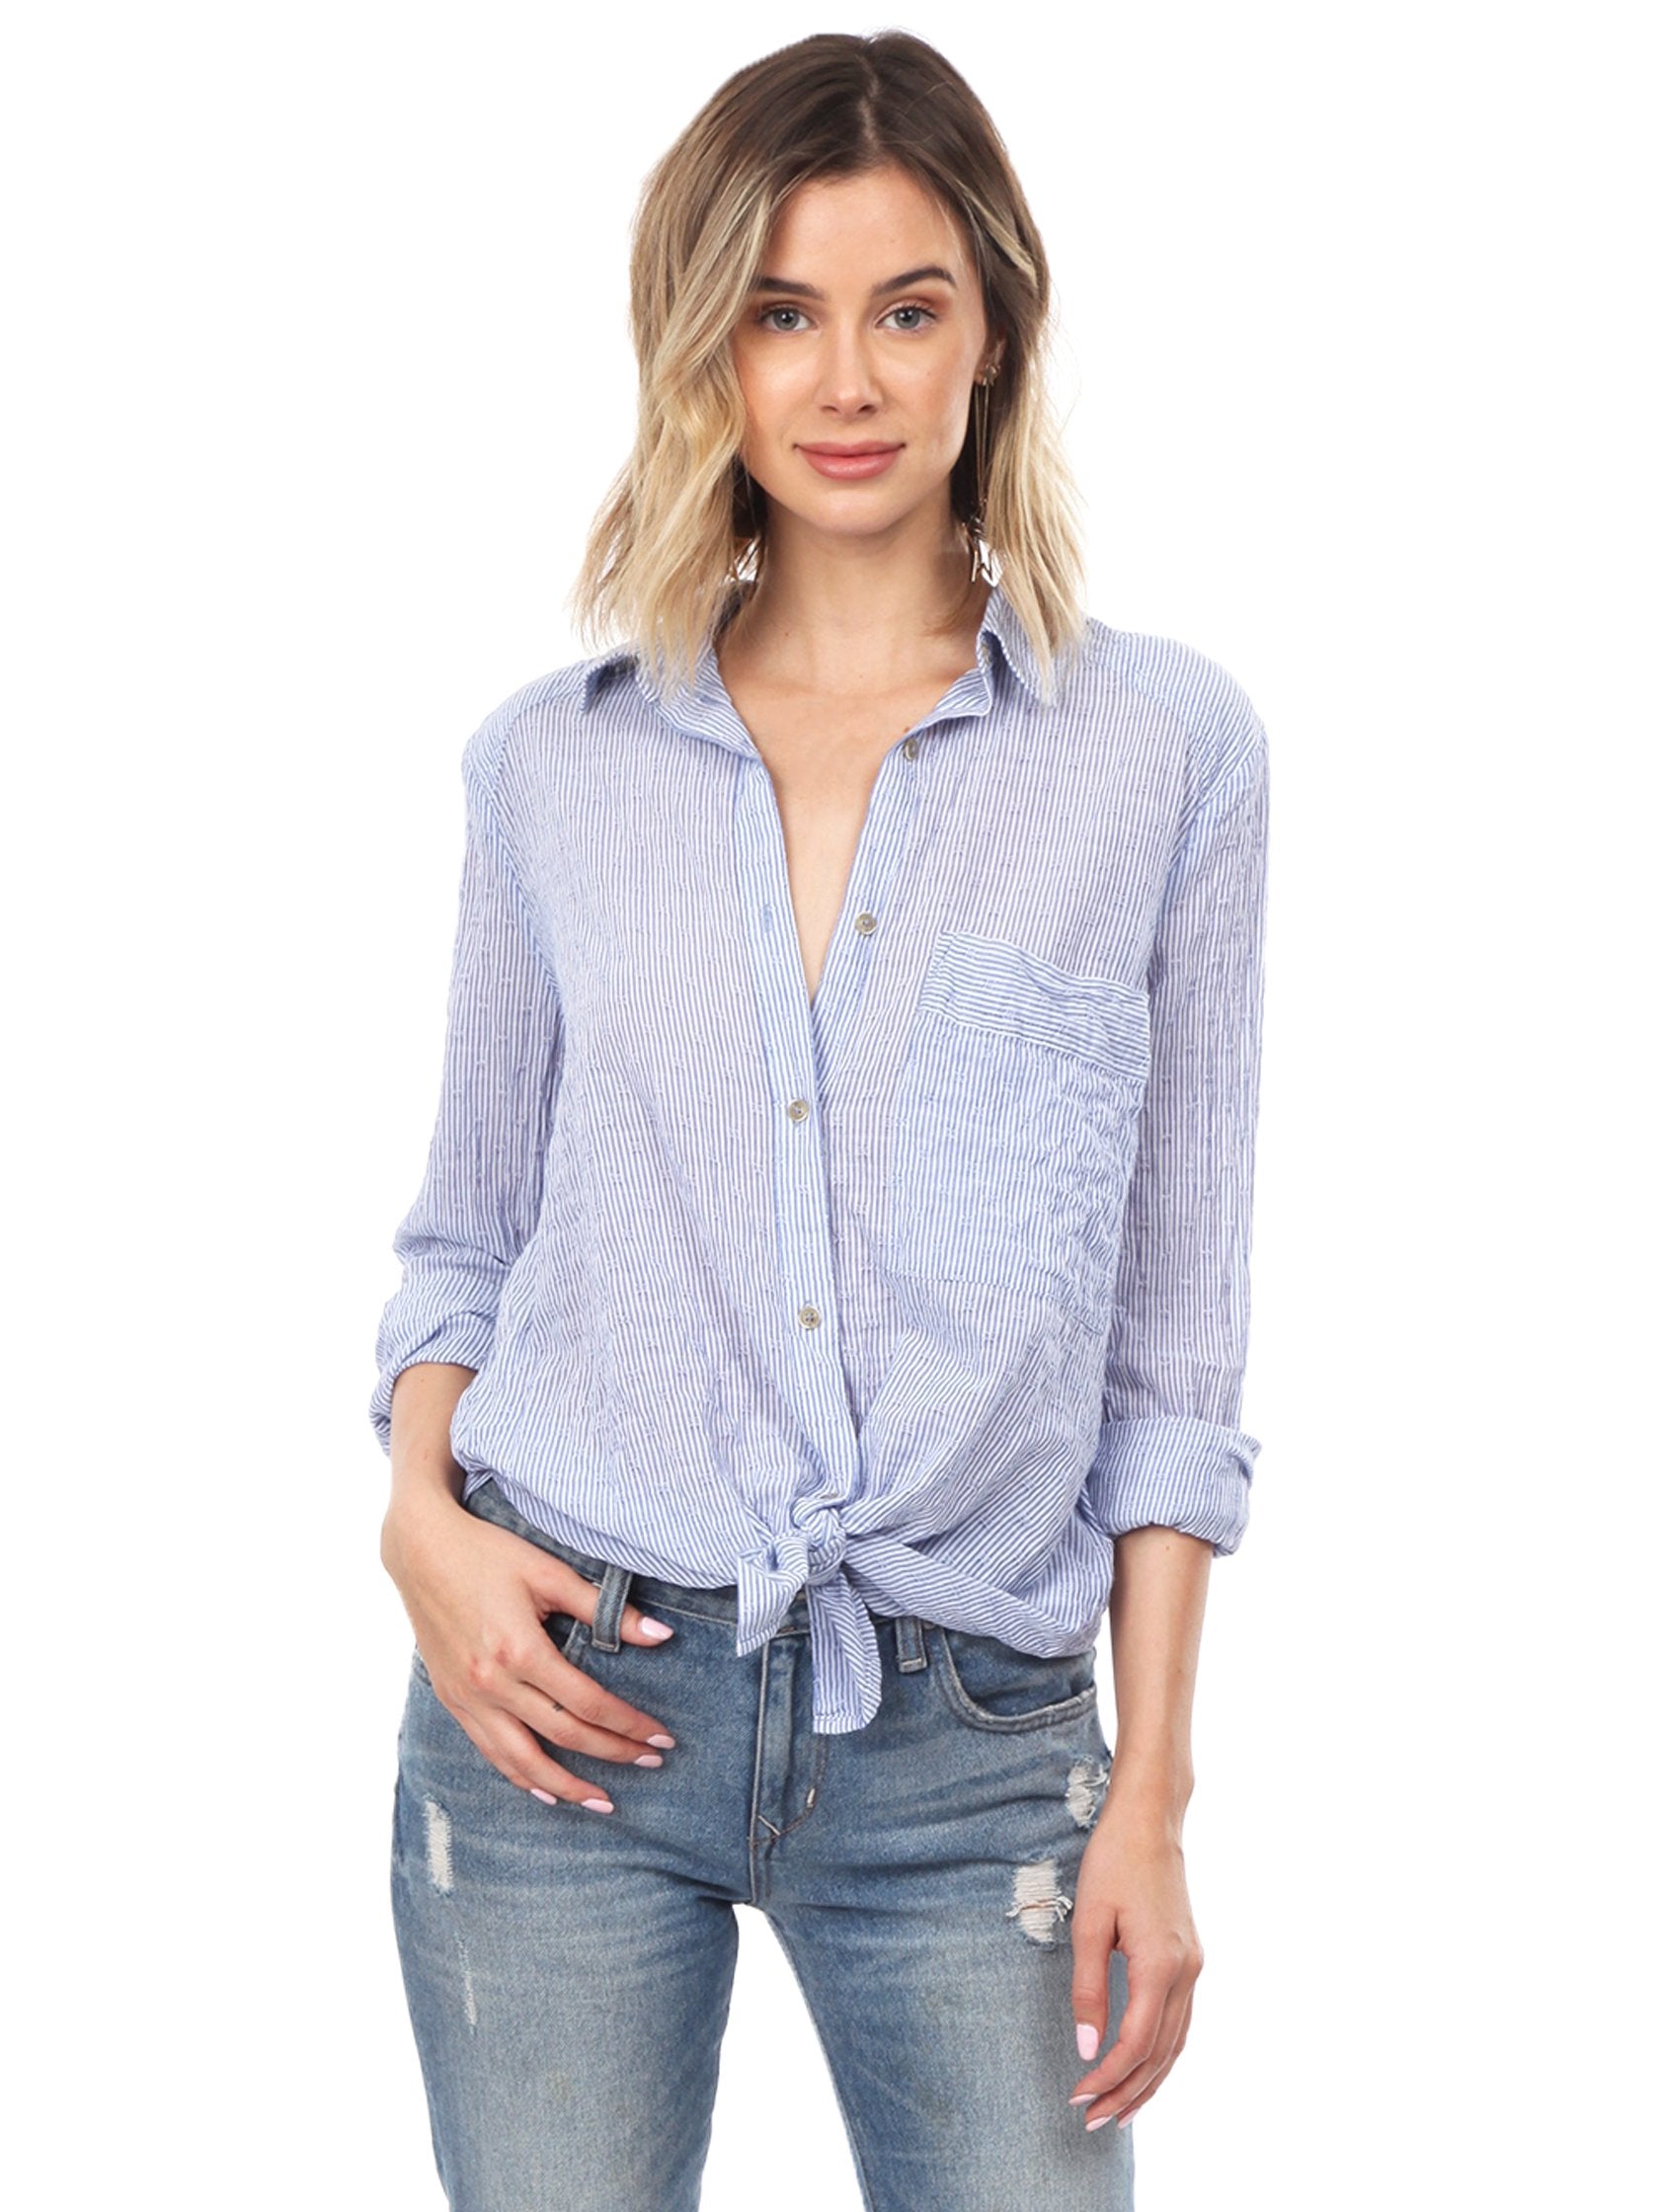 Women wearing a top rental from Free People called No Limits Stripe Stretch Cotton Shirt